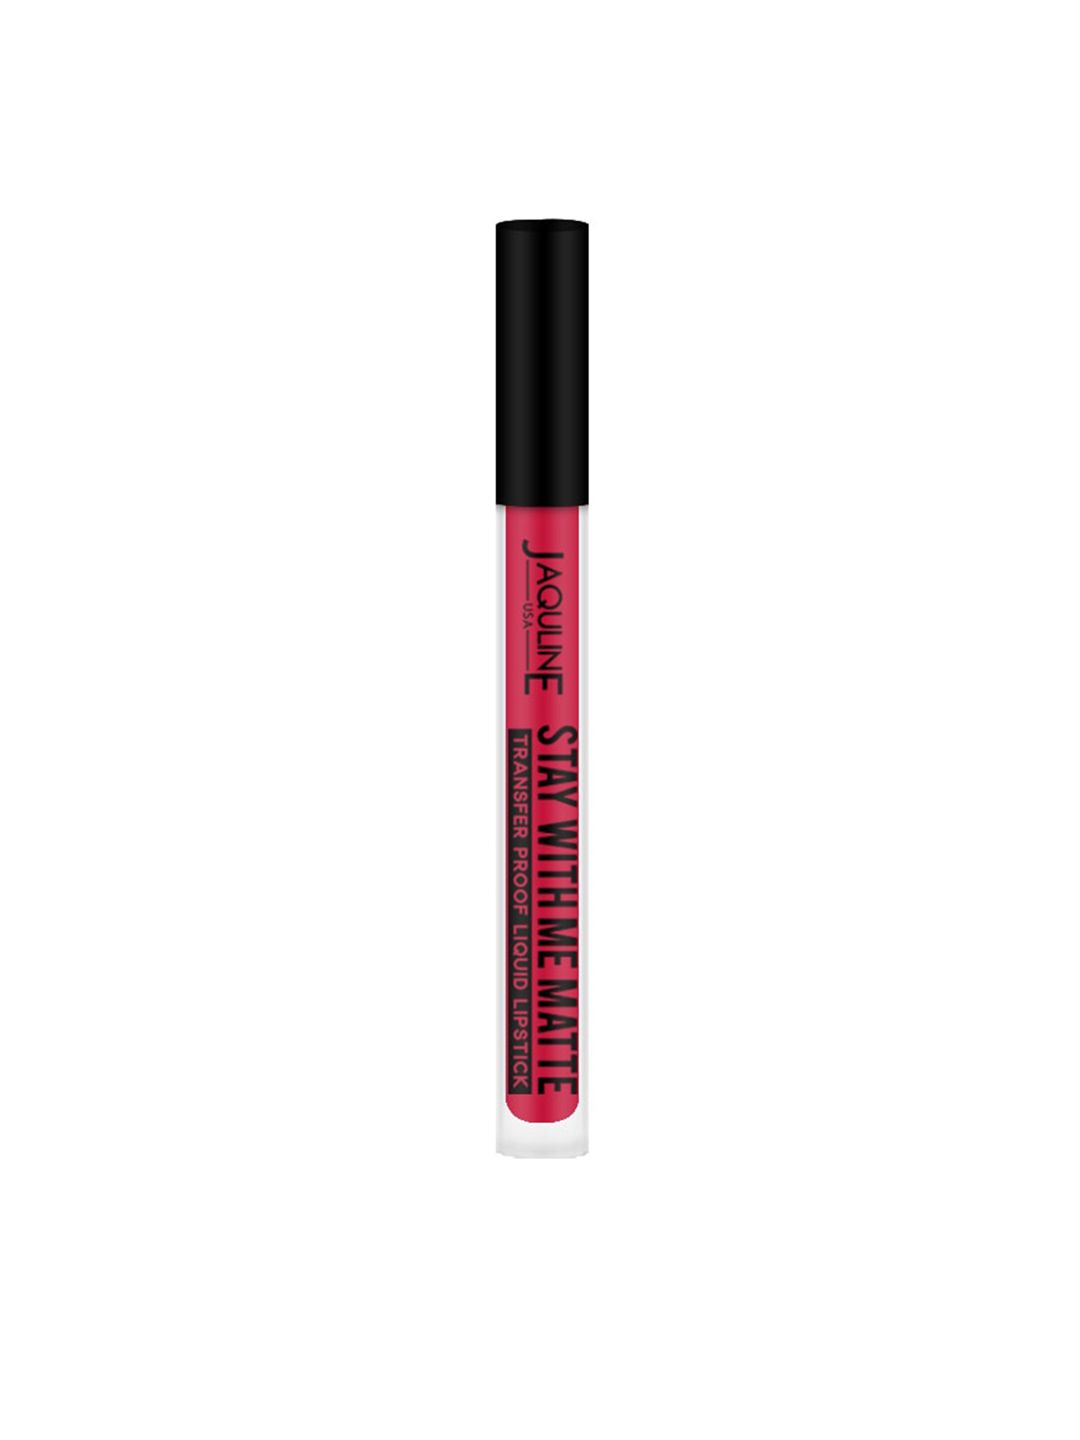 Jaquline USA Stay With Me Liquid Lipstick - Racy 3ml Price in India